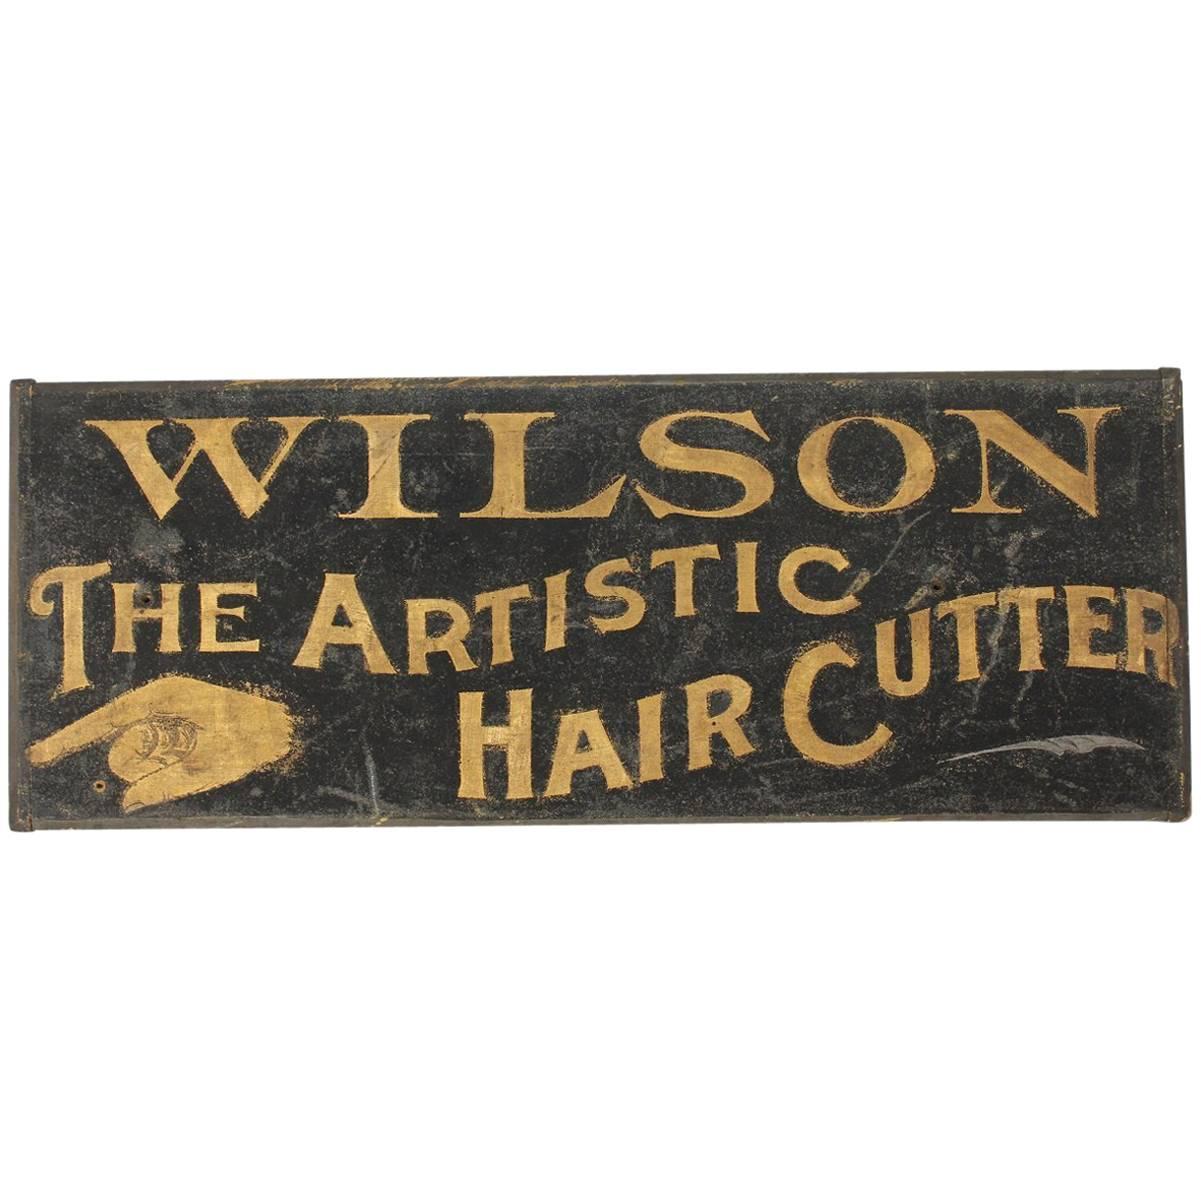 Antique Hand Gold Leafed "The Artistic Hair Cutter" Sign